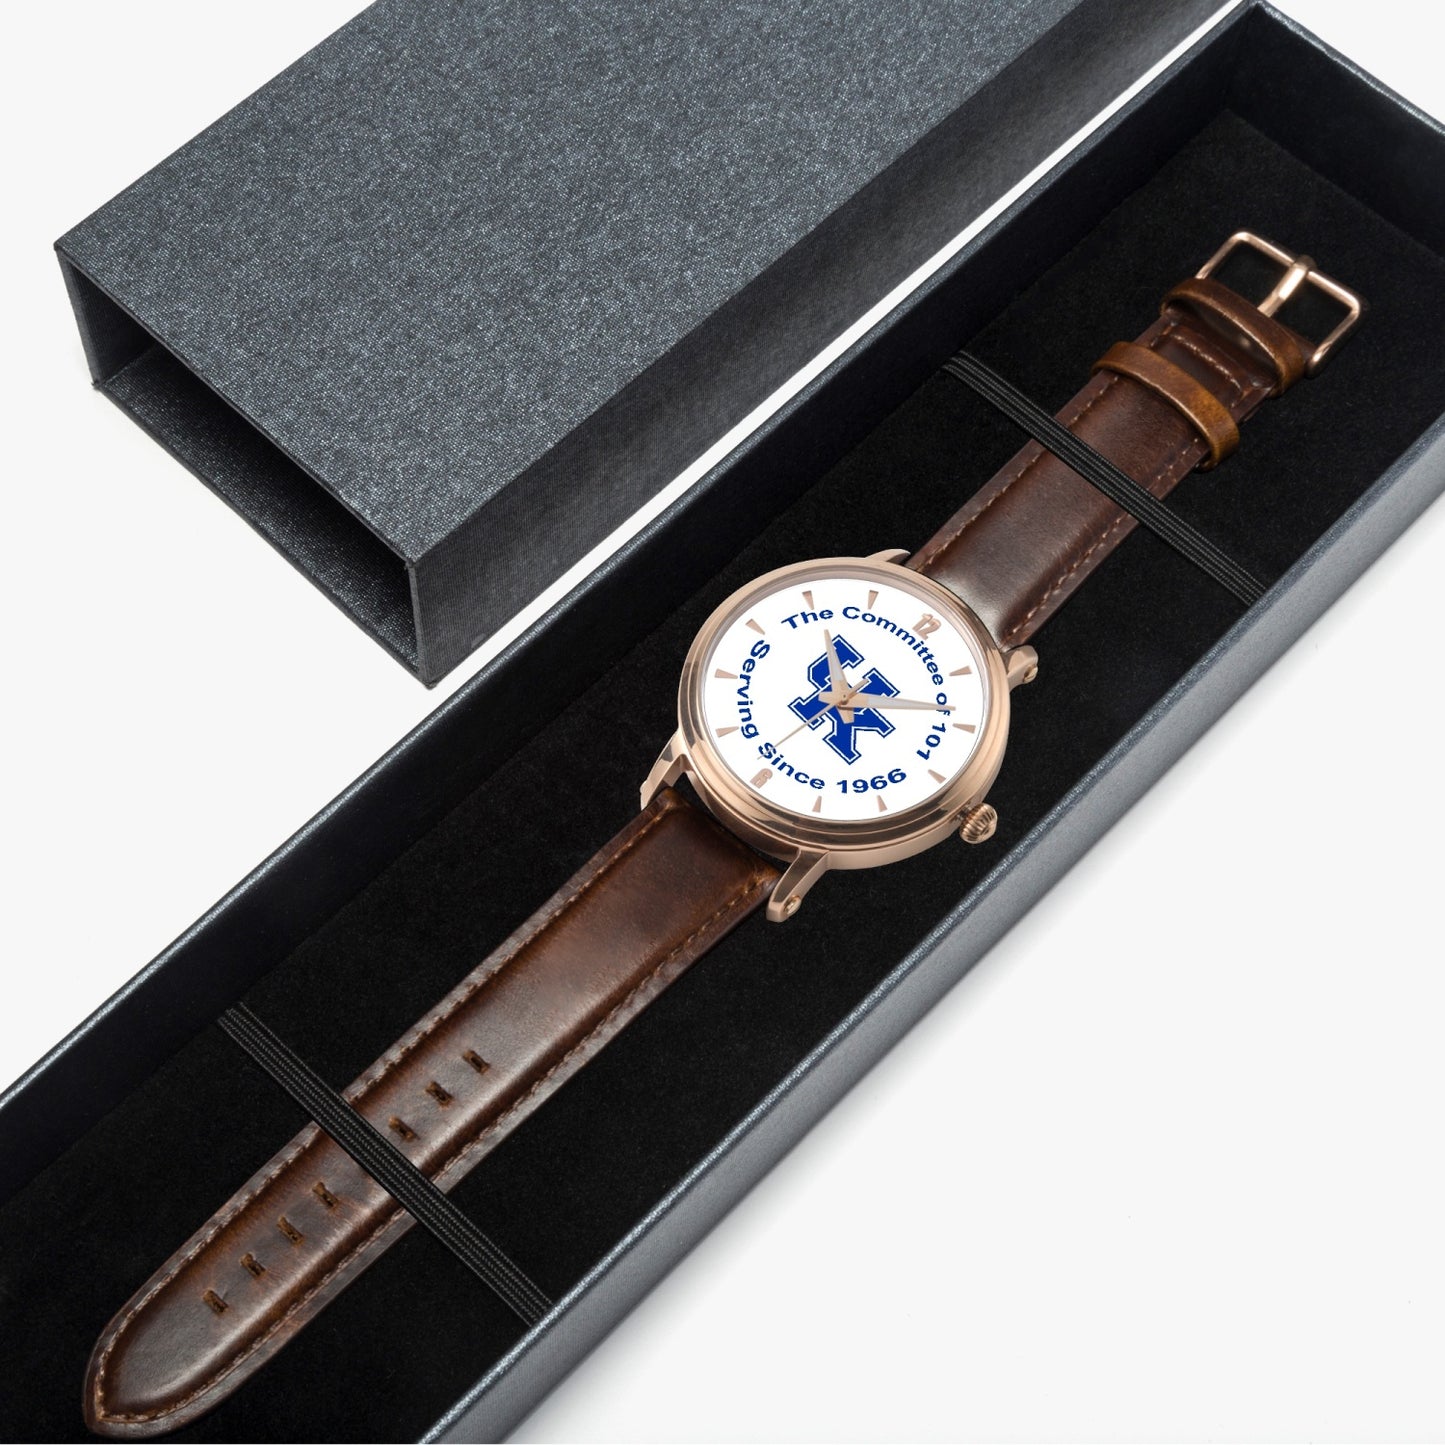 "The Rupp - Rose Gold" - The Committee of 101 Leather Strap Automatic Watch